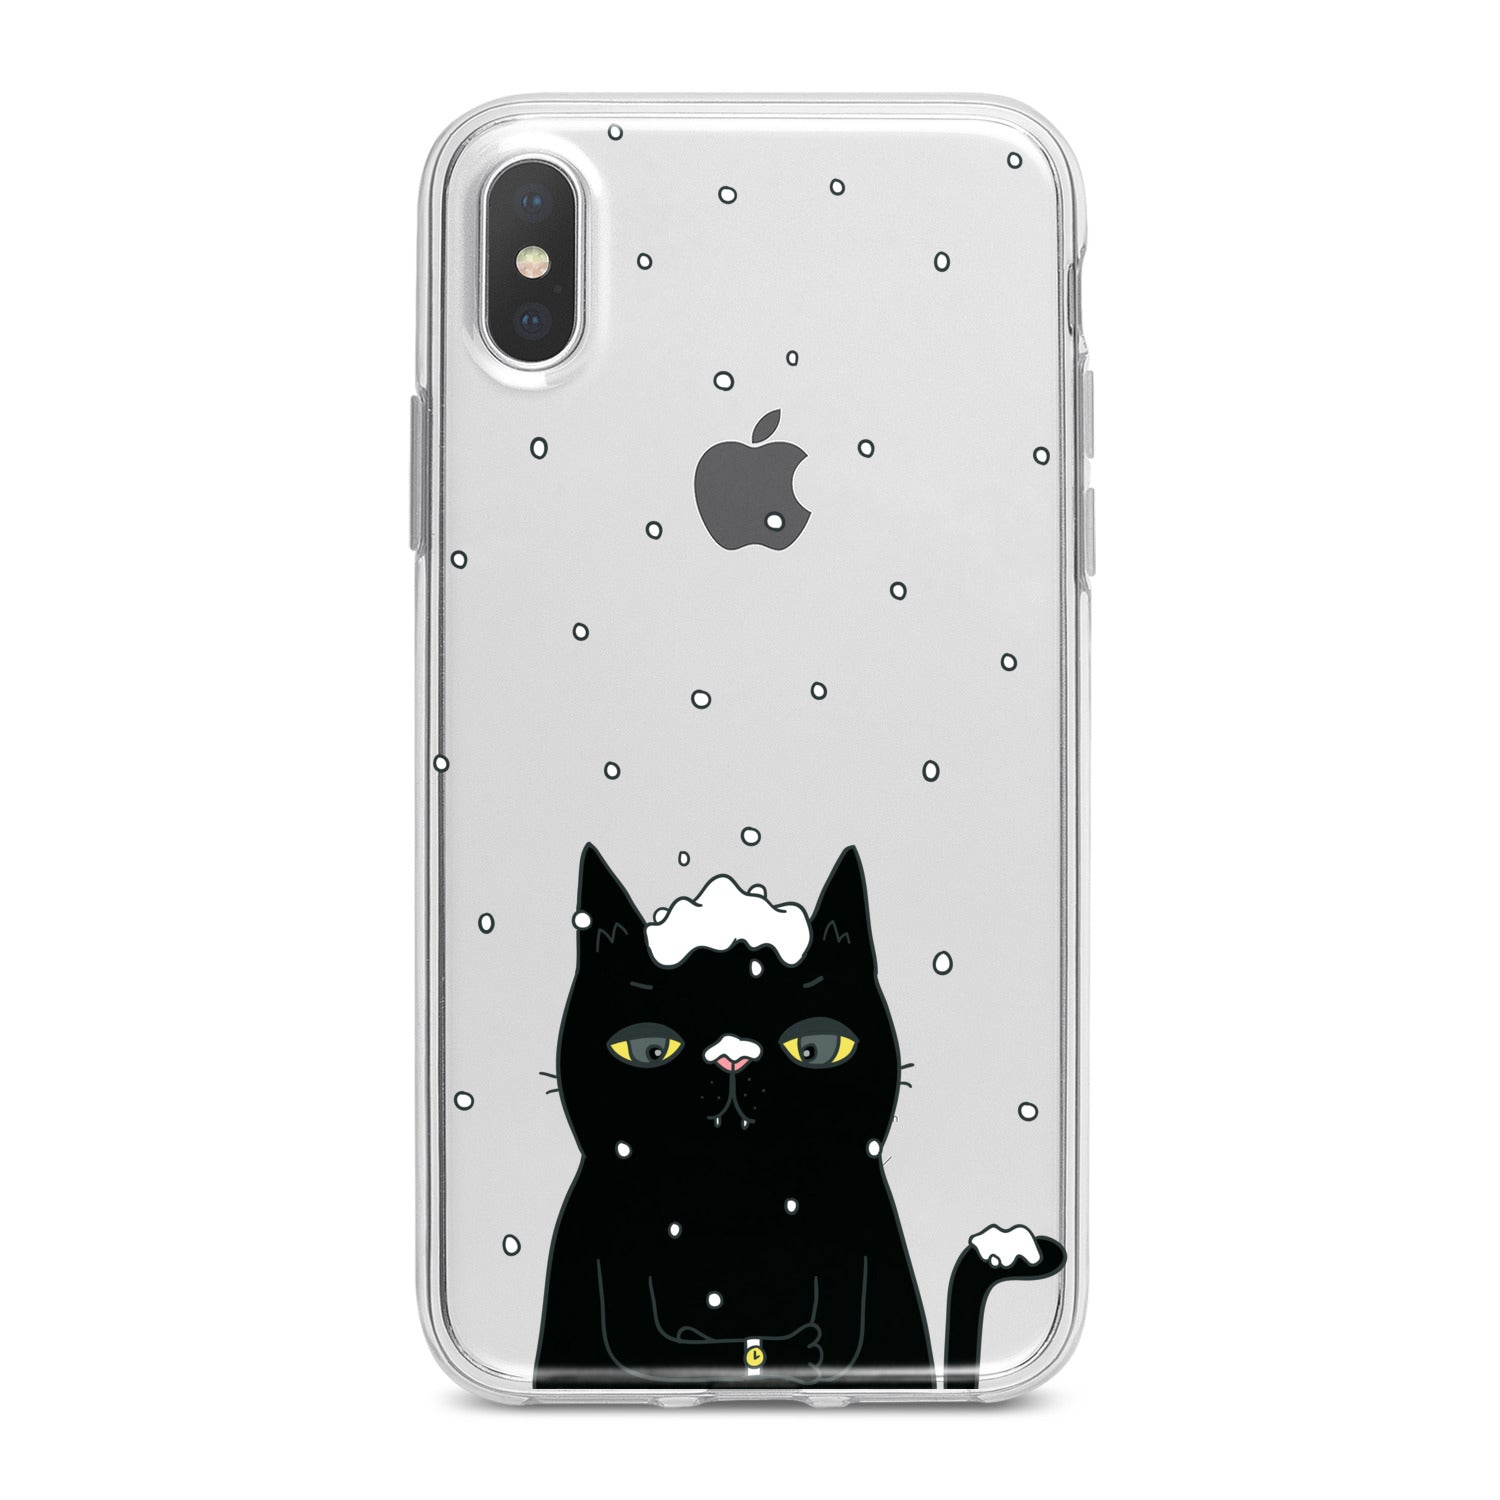 Lex Altern Black Snowy Cat Phone Case for your iPhone & Android phone.